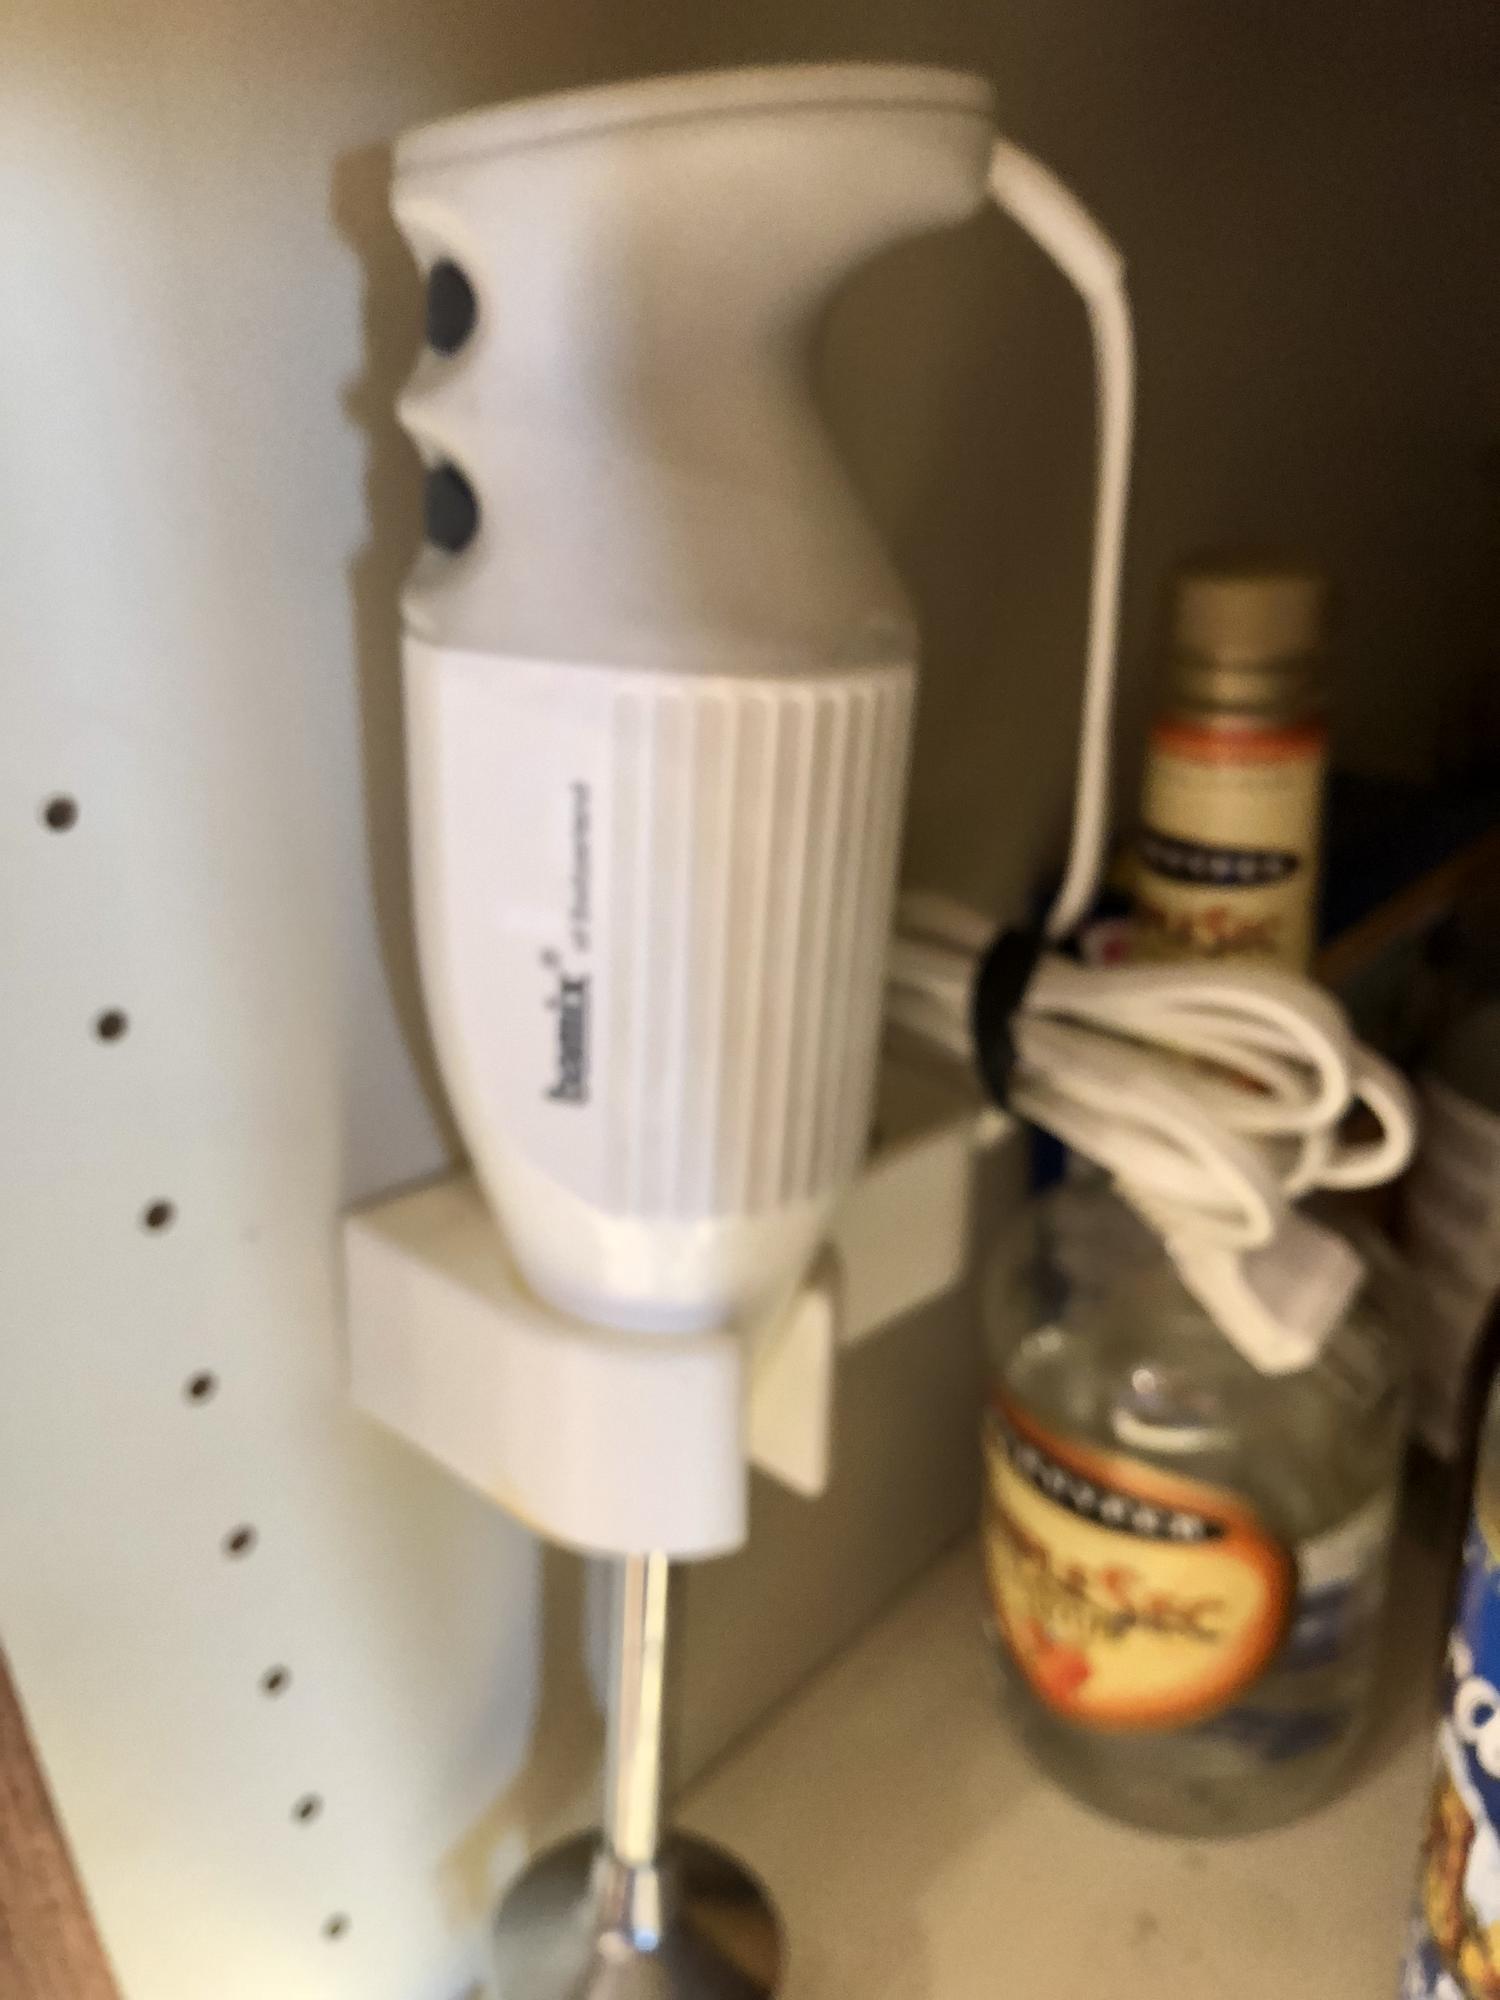 Immersion blender attachment for cordless drill/driver? - Reviews -  ToolGuyd Community Forum